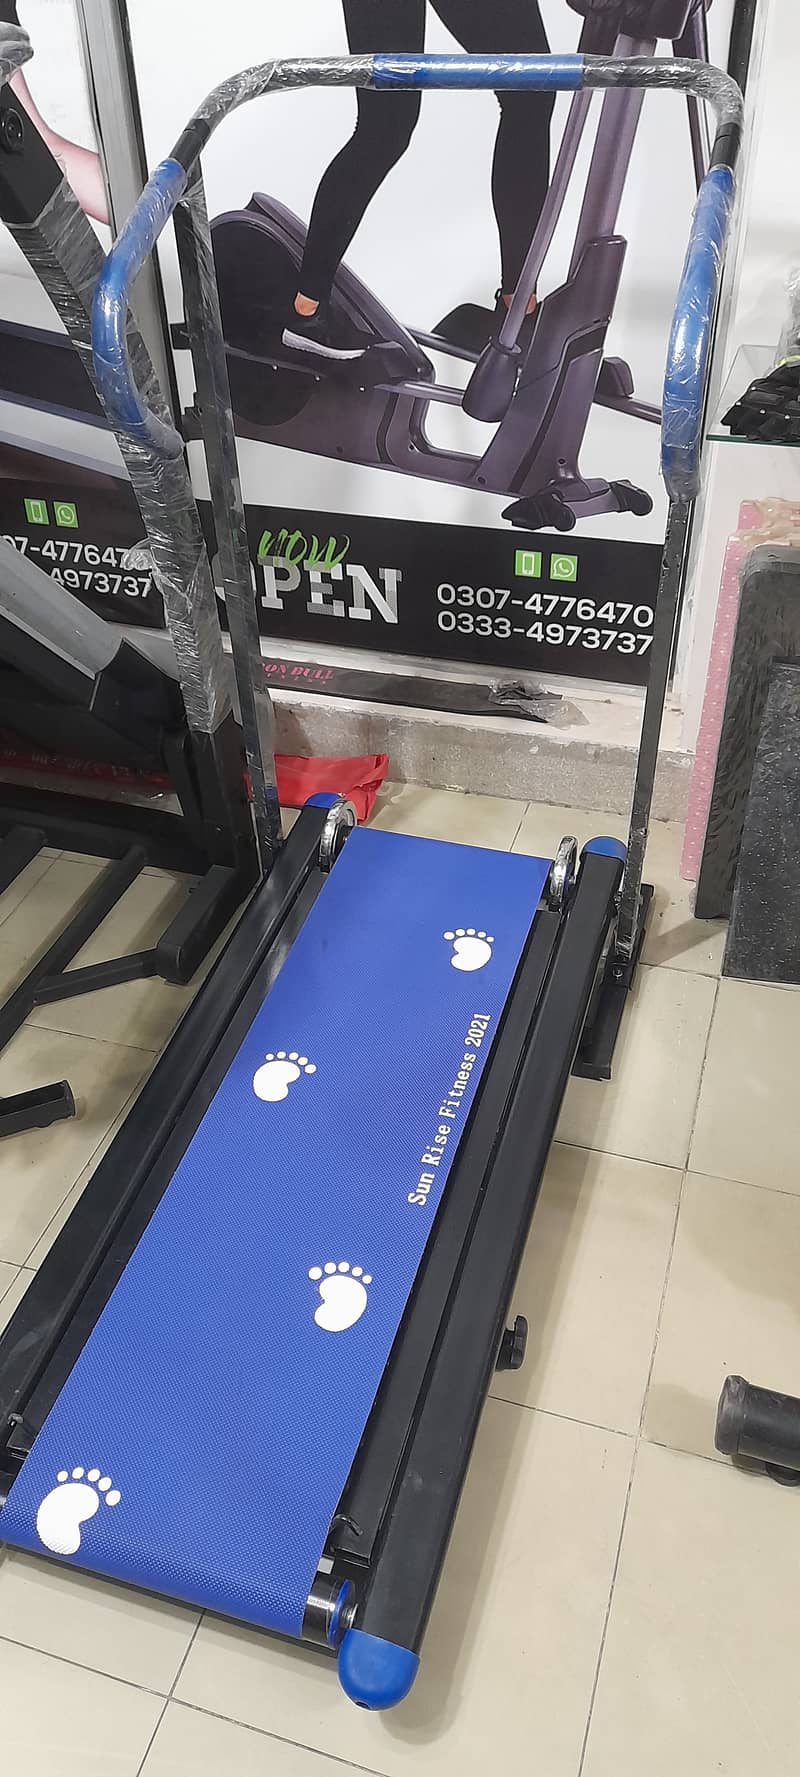 Manual Rollers Treadmill Exercise machine. 03334973737 2